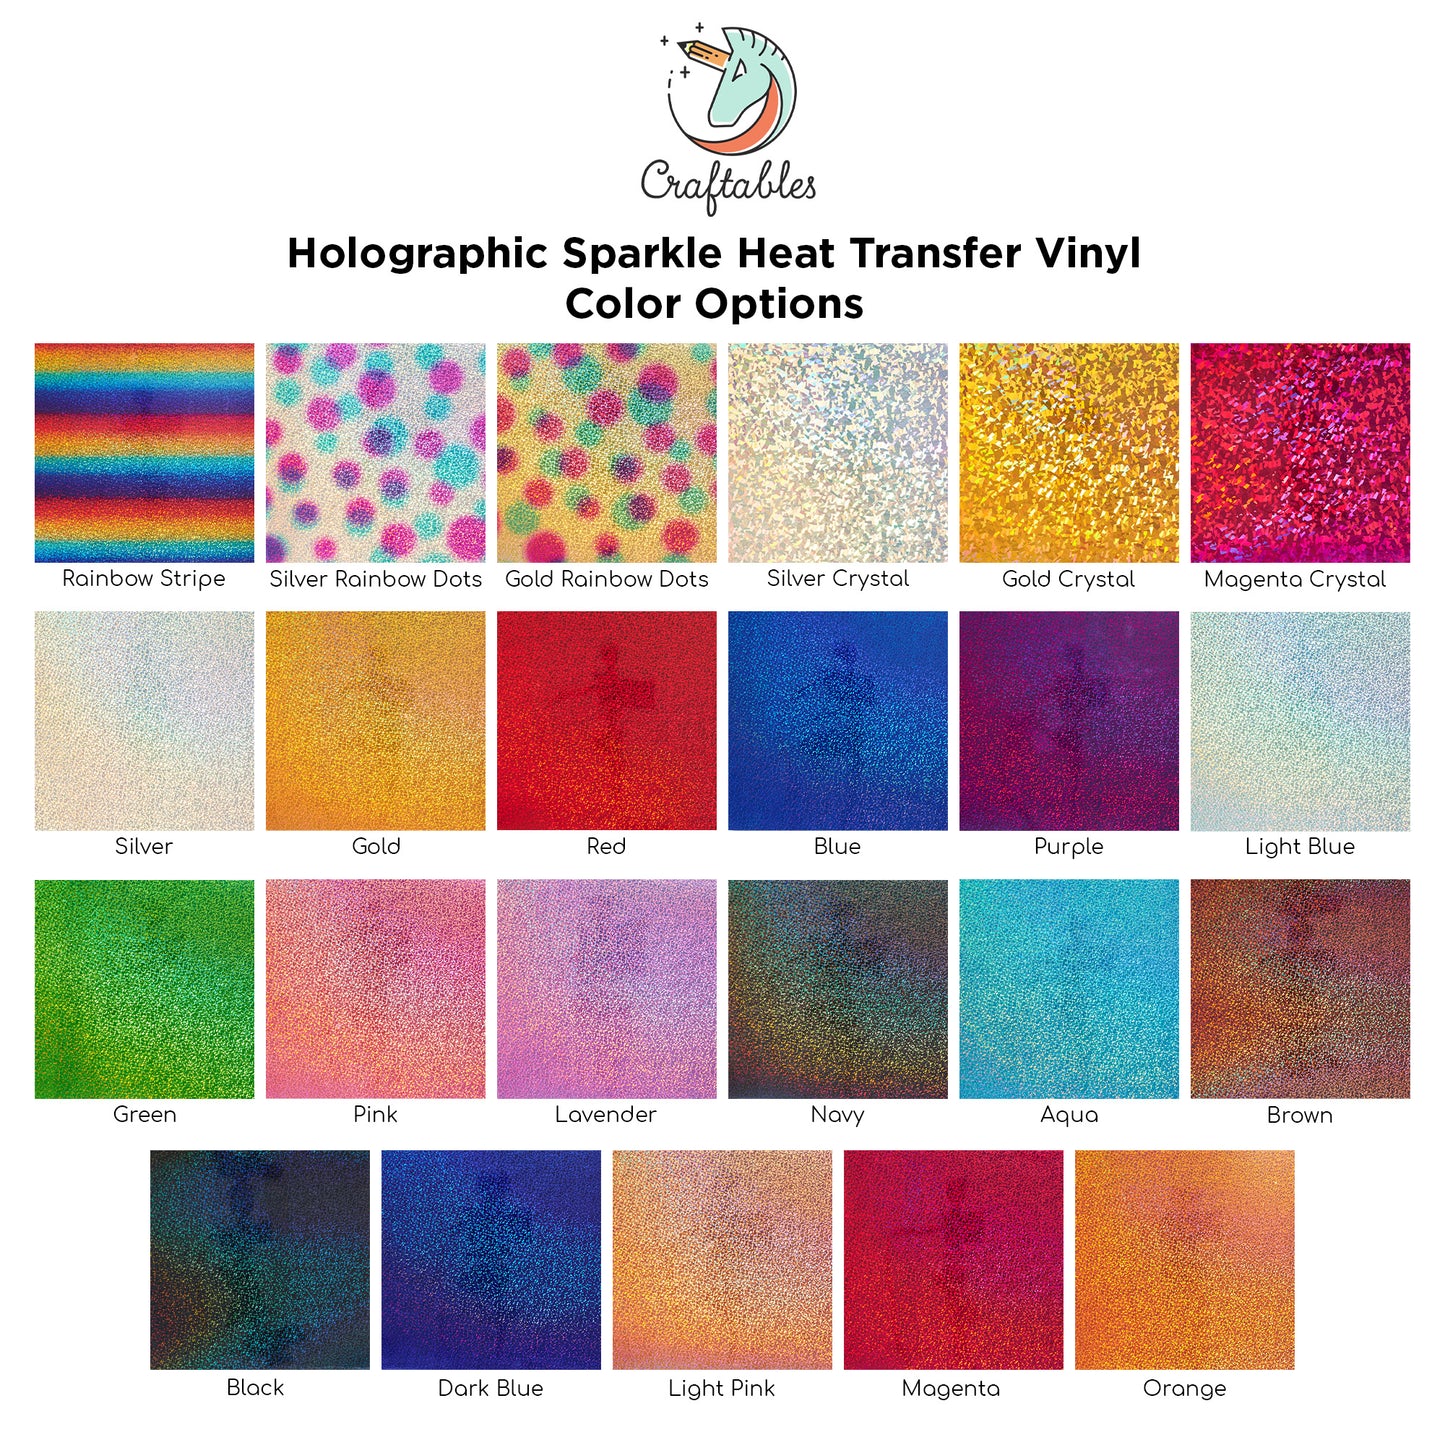 Black Holographic Sparkle Heat Transfer Vinyl Rolls By Craftables